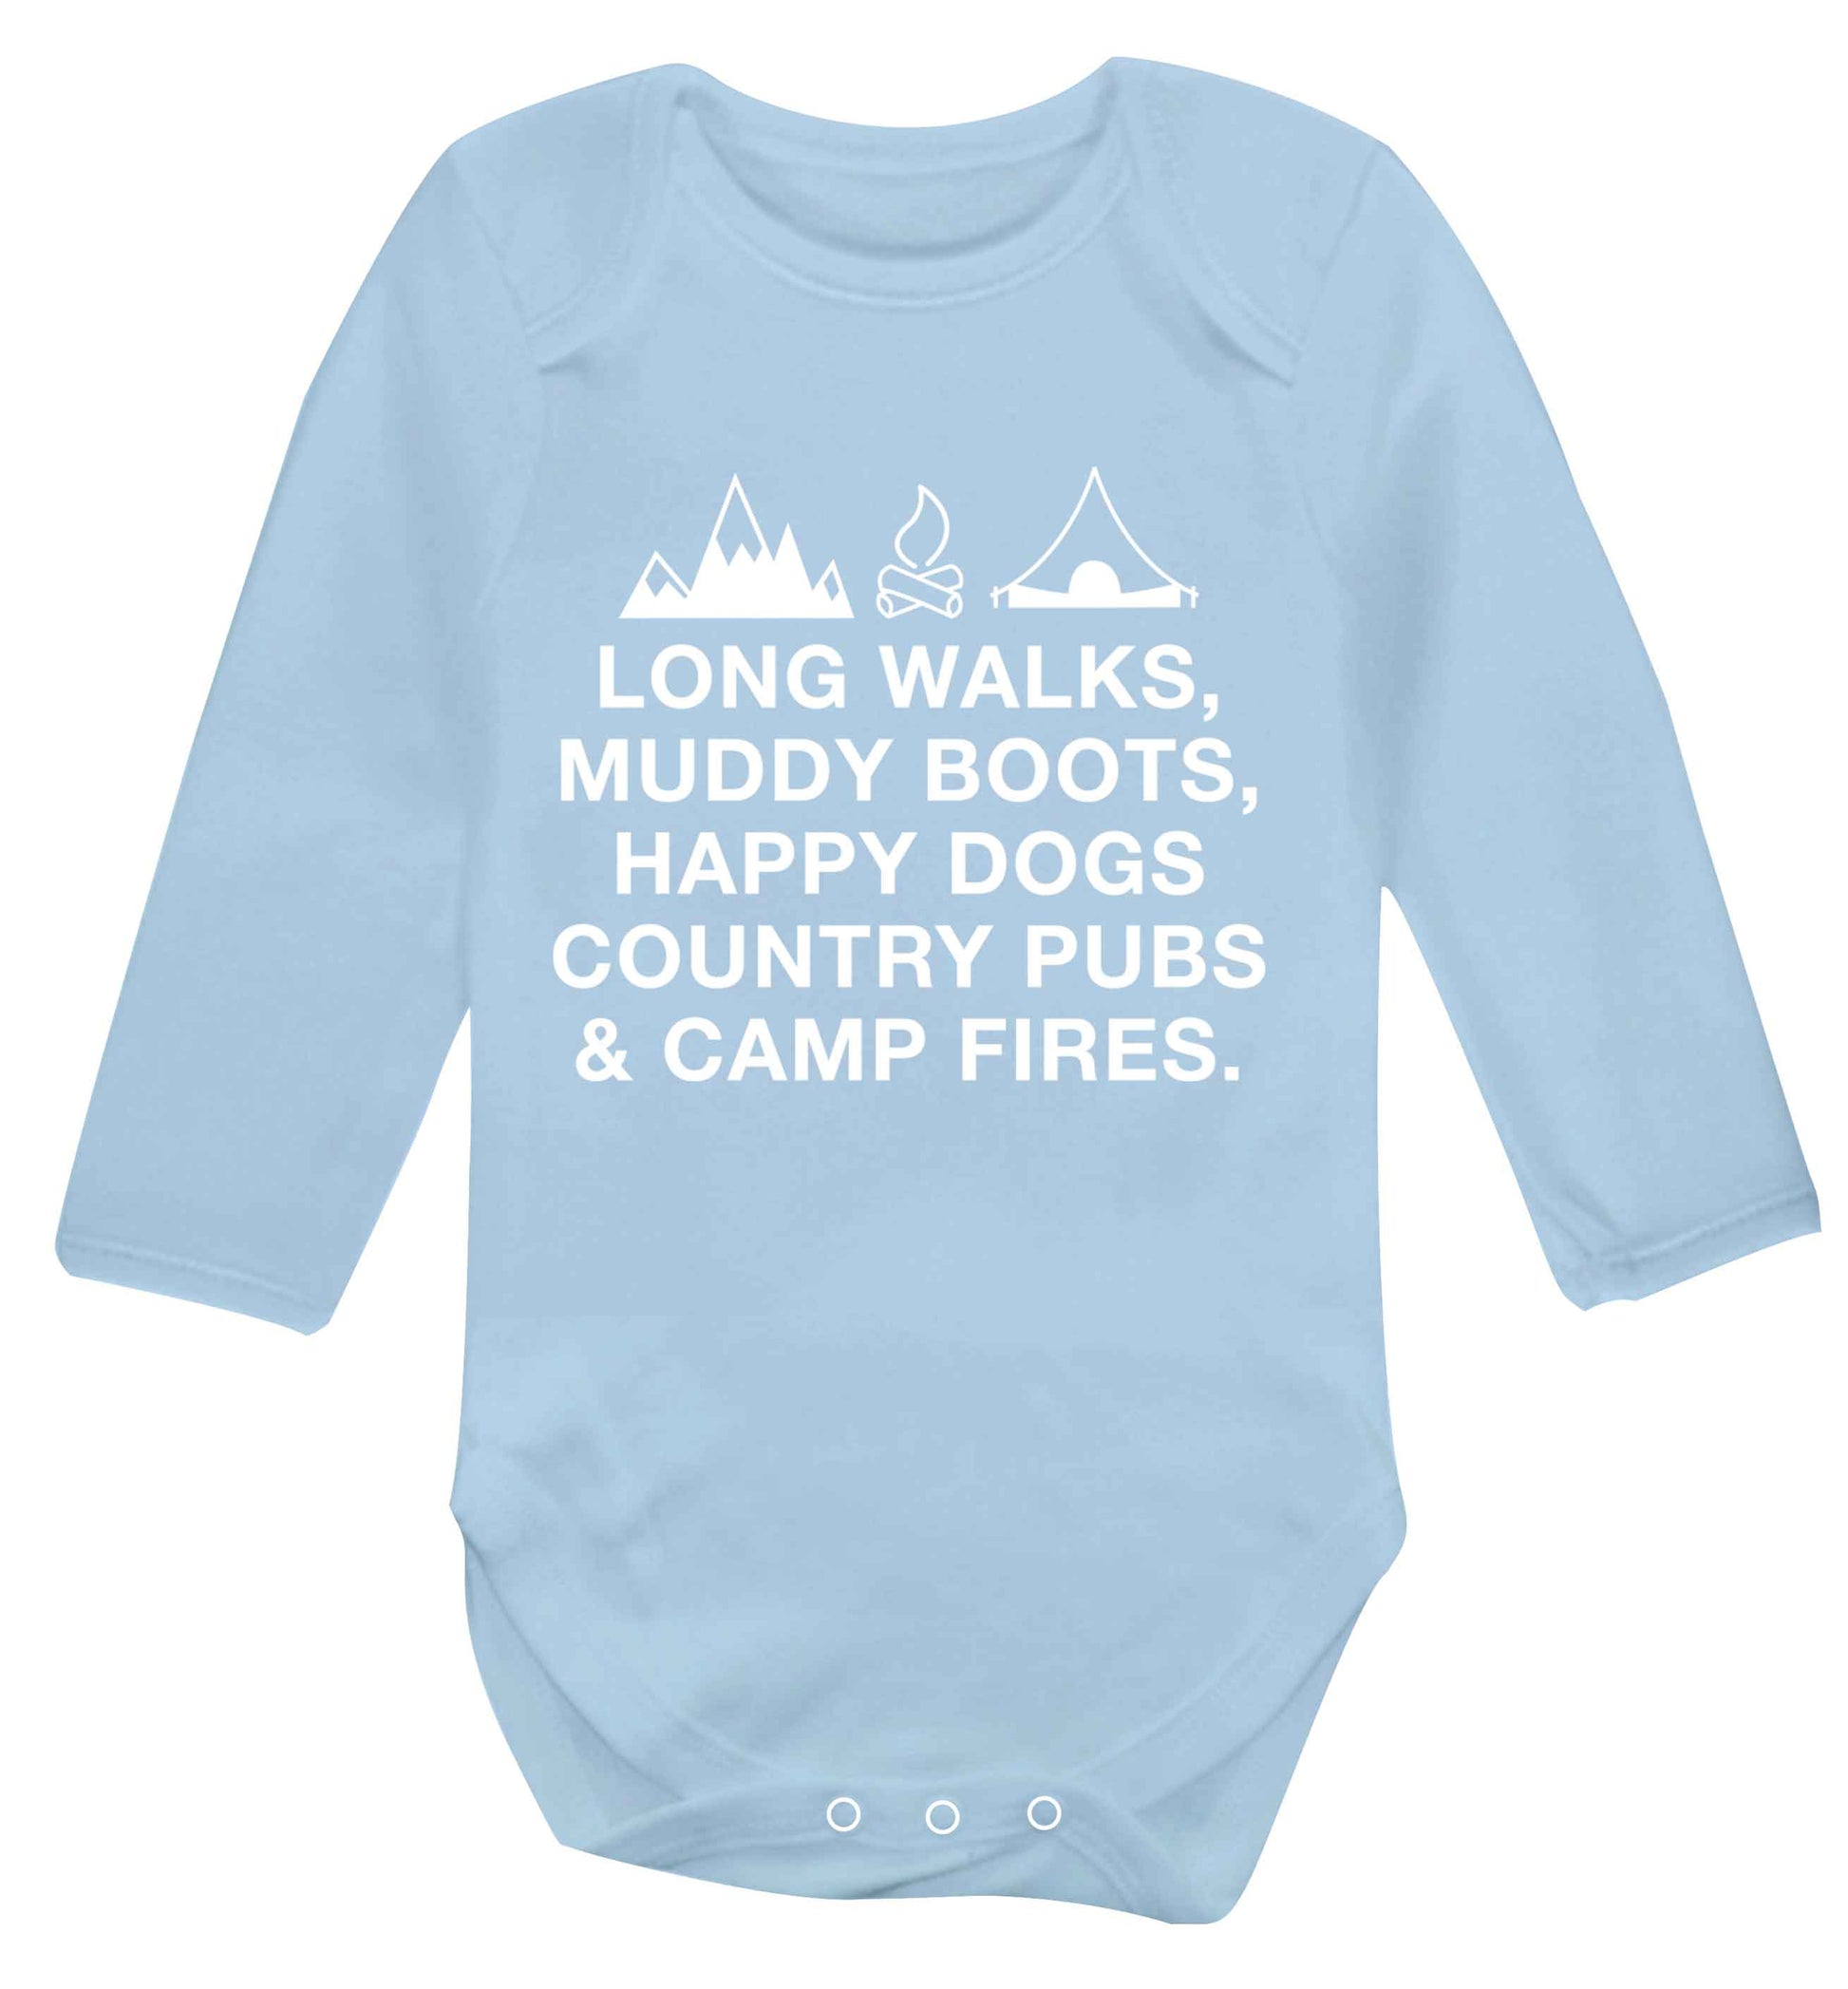 Long walks muddy boots happy dogs country pubs and camp fires Baby Vest long sleeved pale blue 6-12 months